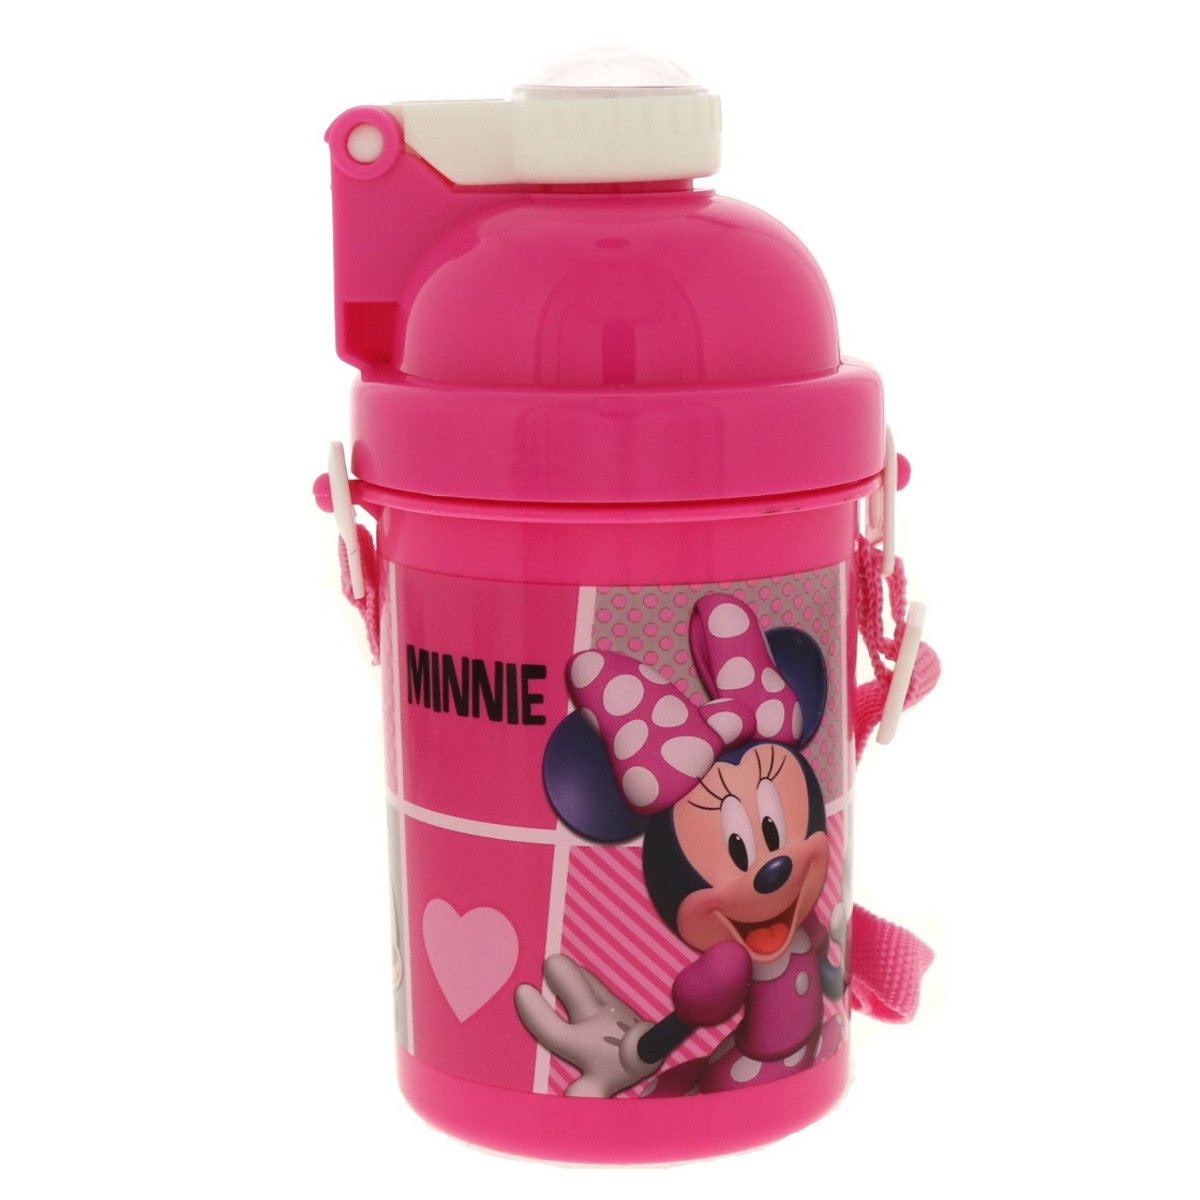 Minnie Mouse Water Bottle 112-42-0909